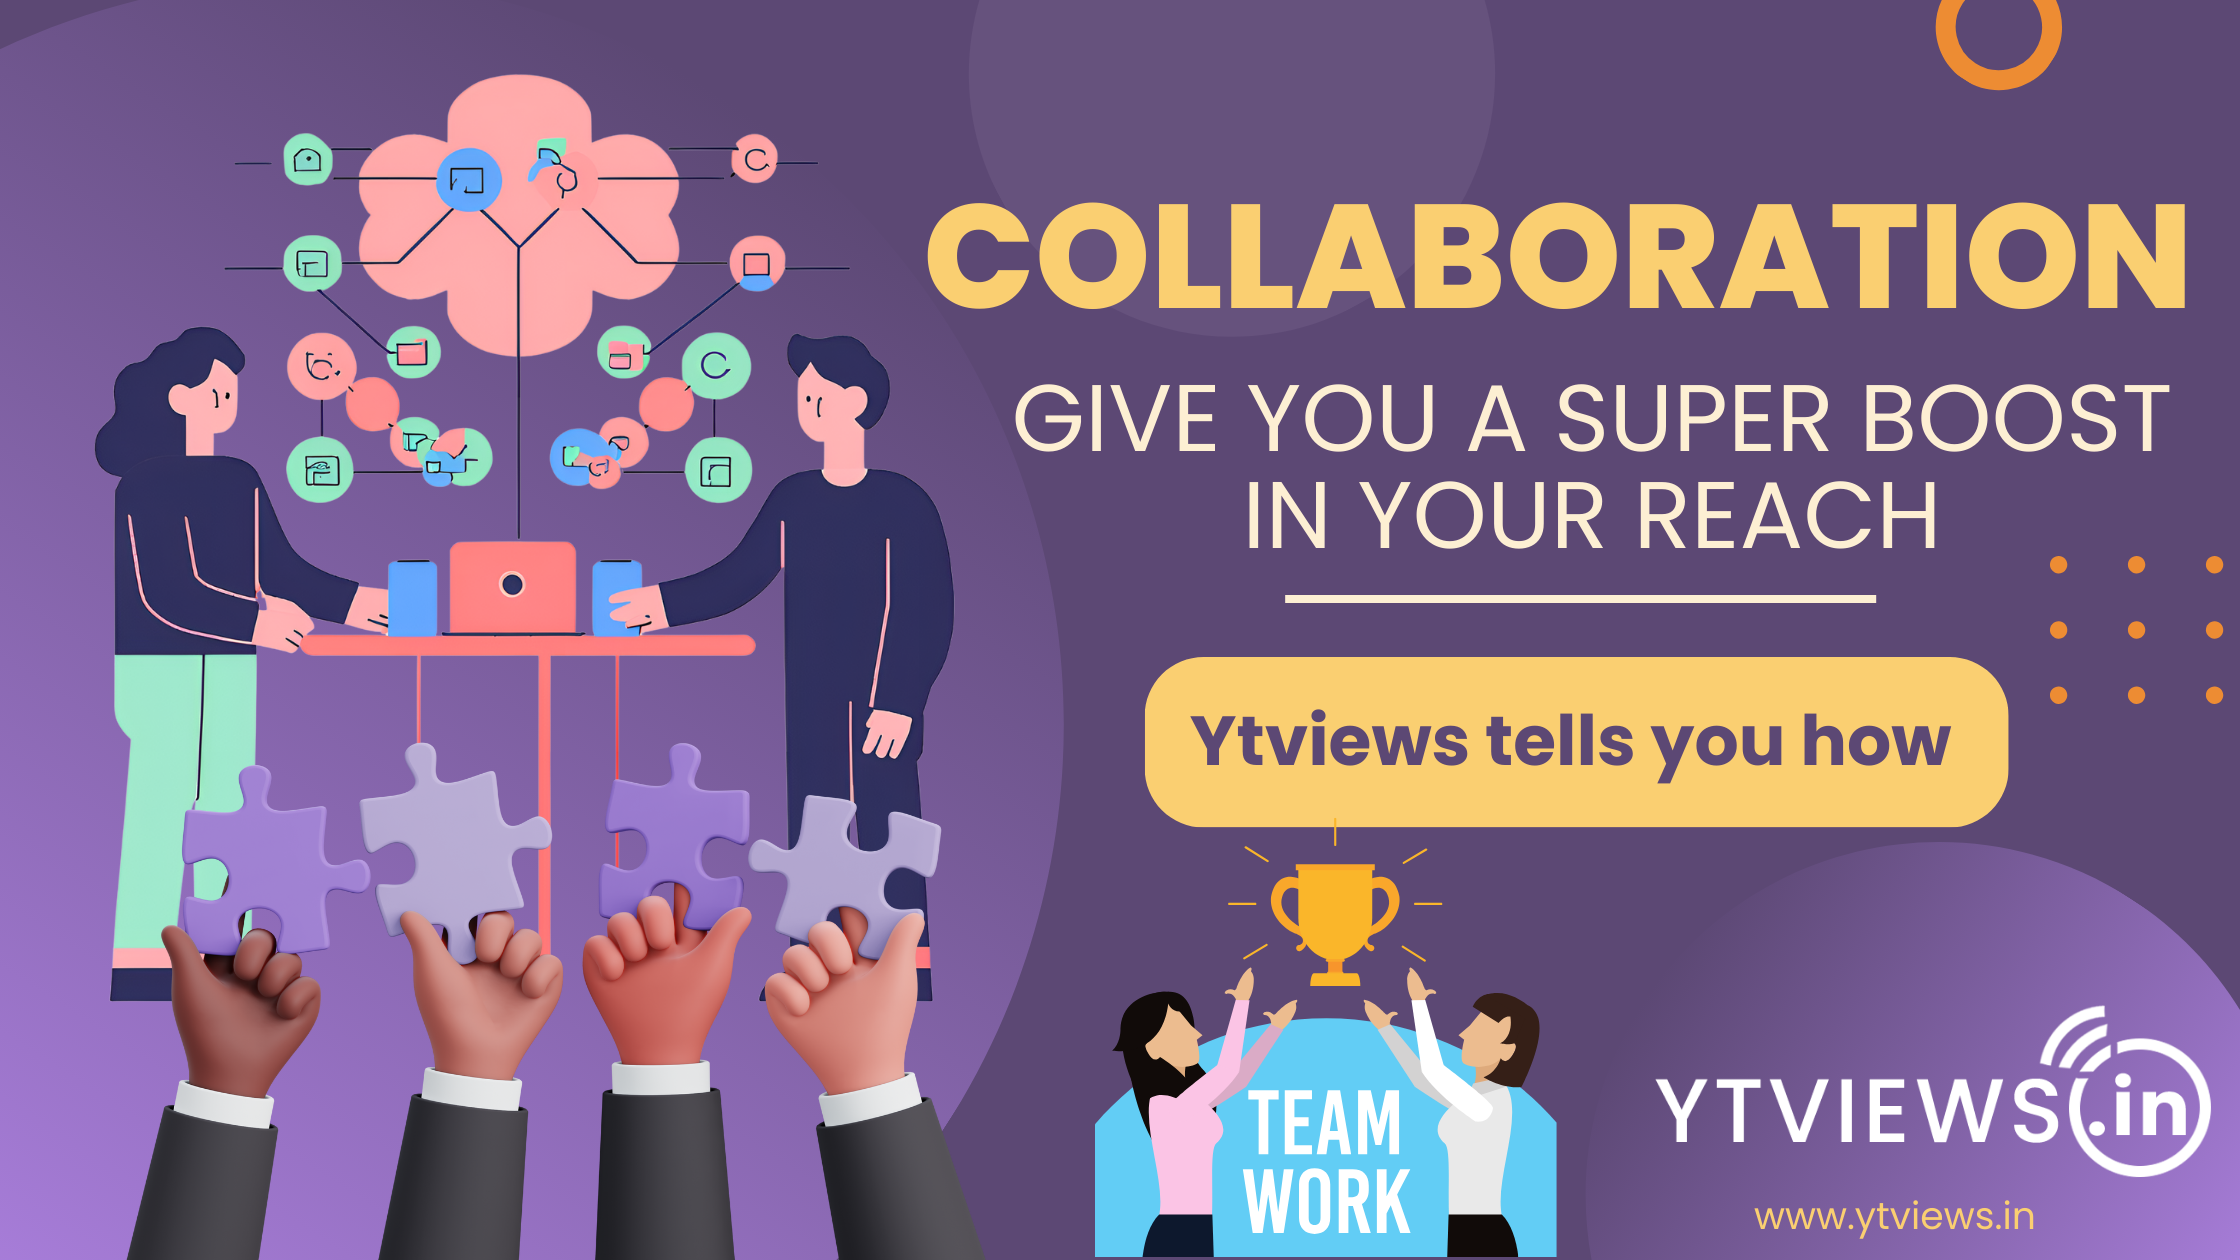 Collaboration can give you a super boost in your reach. Ytviews tells you how